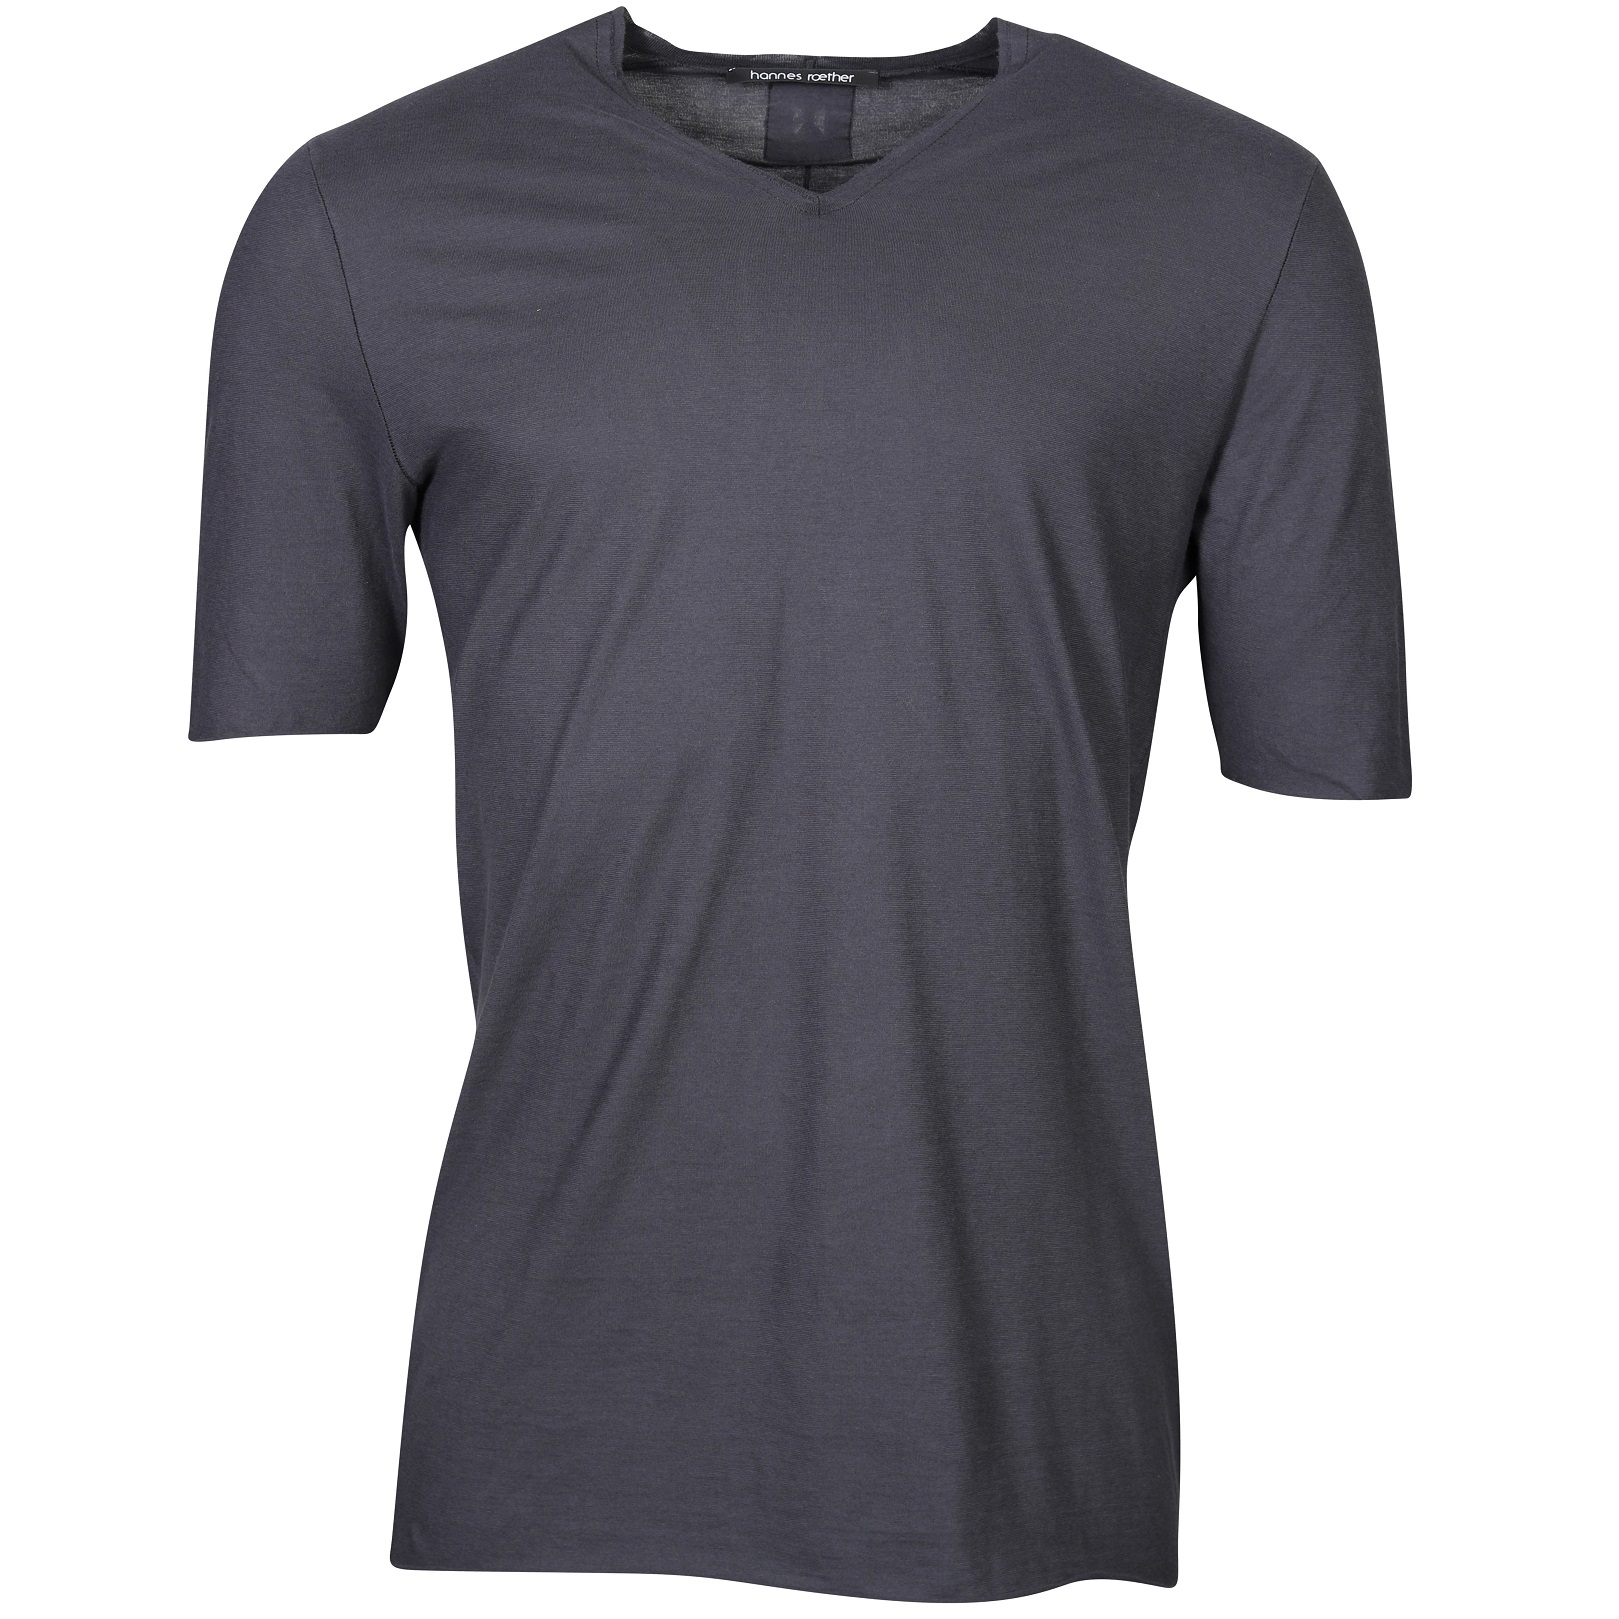 Hannes Roether V-Neck T-Shirt in Posh M